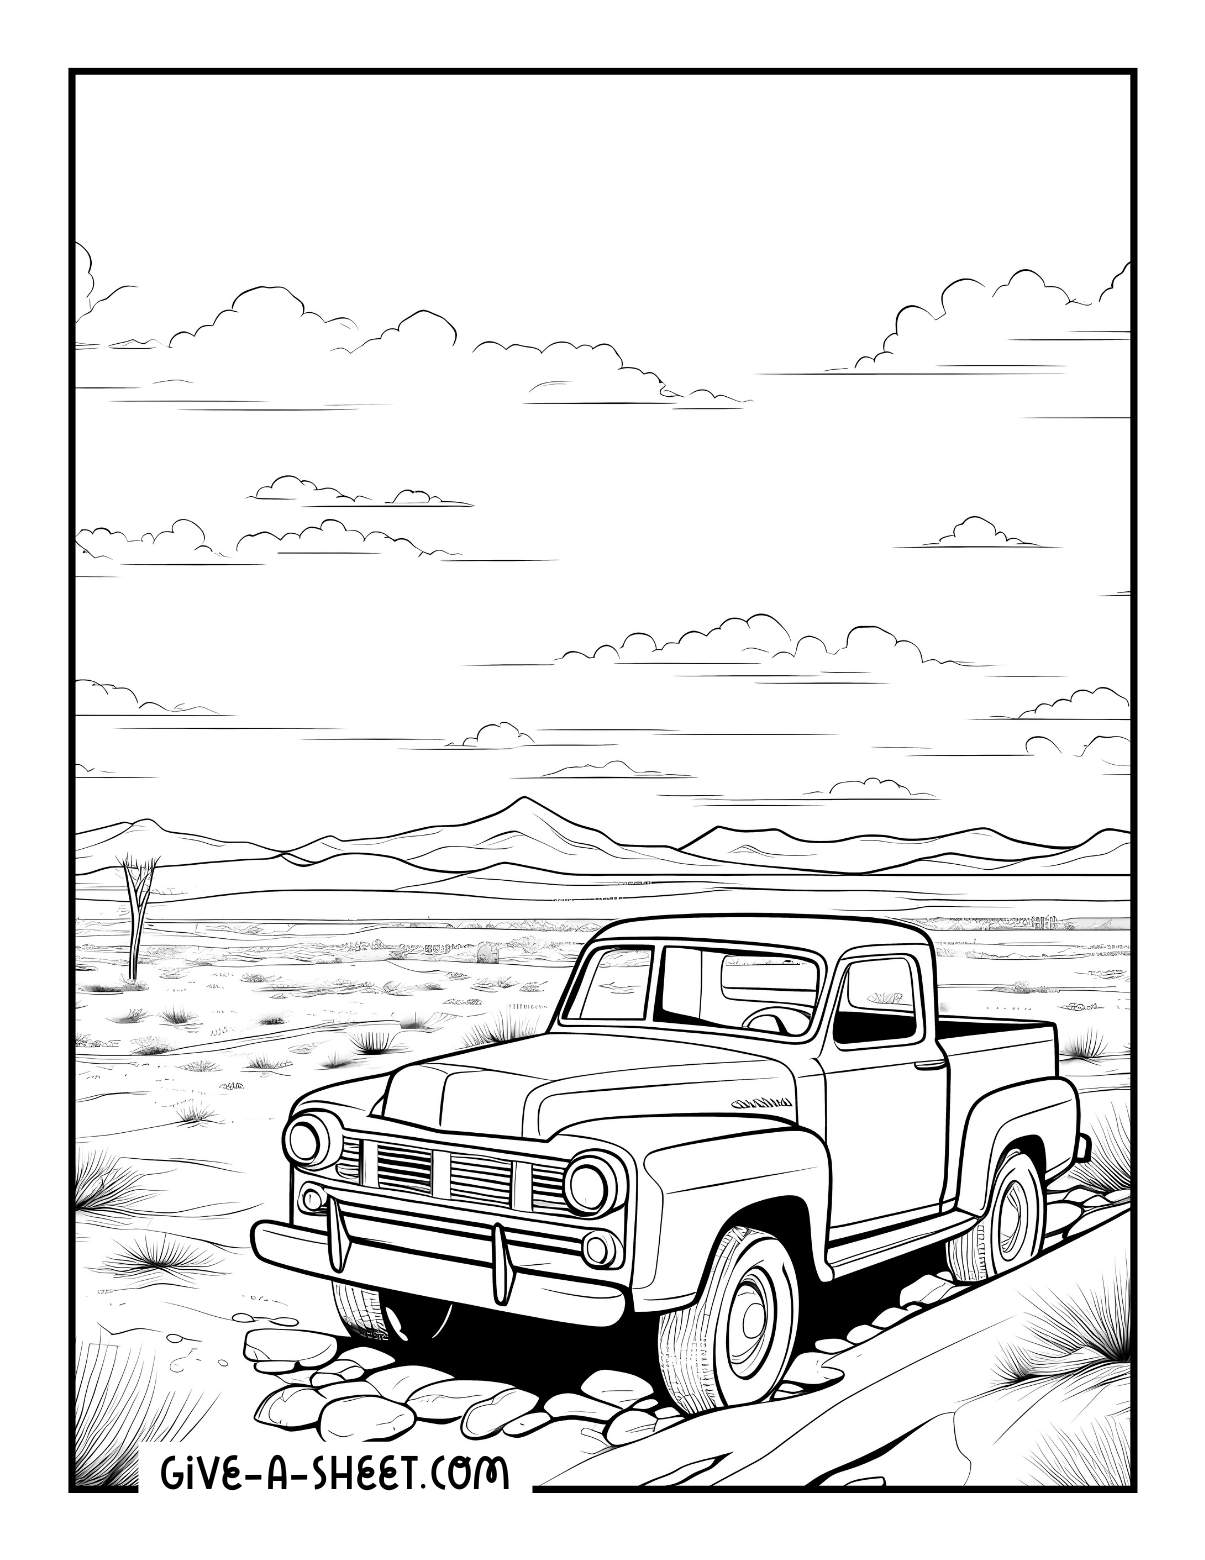 Vintage truck in the desert to color for adults.